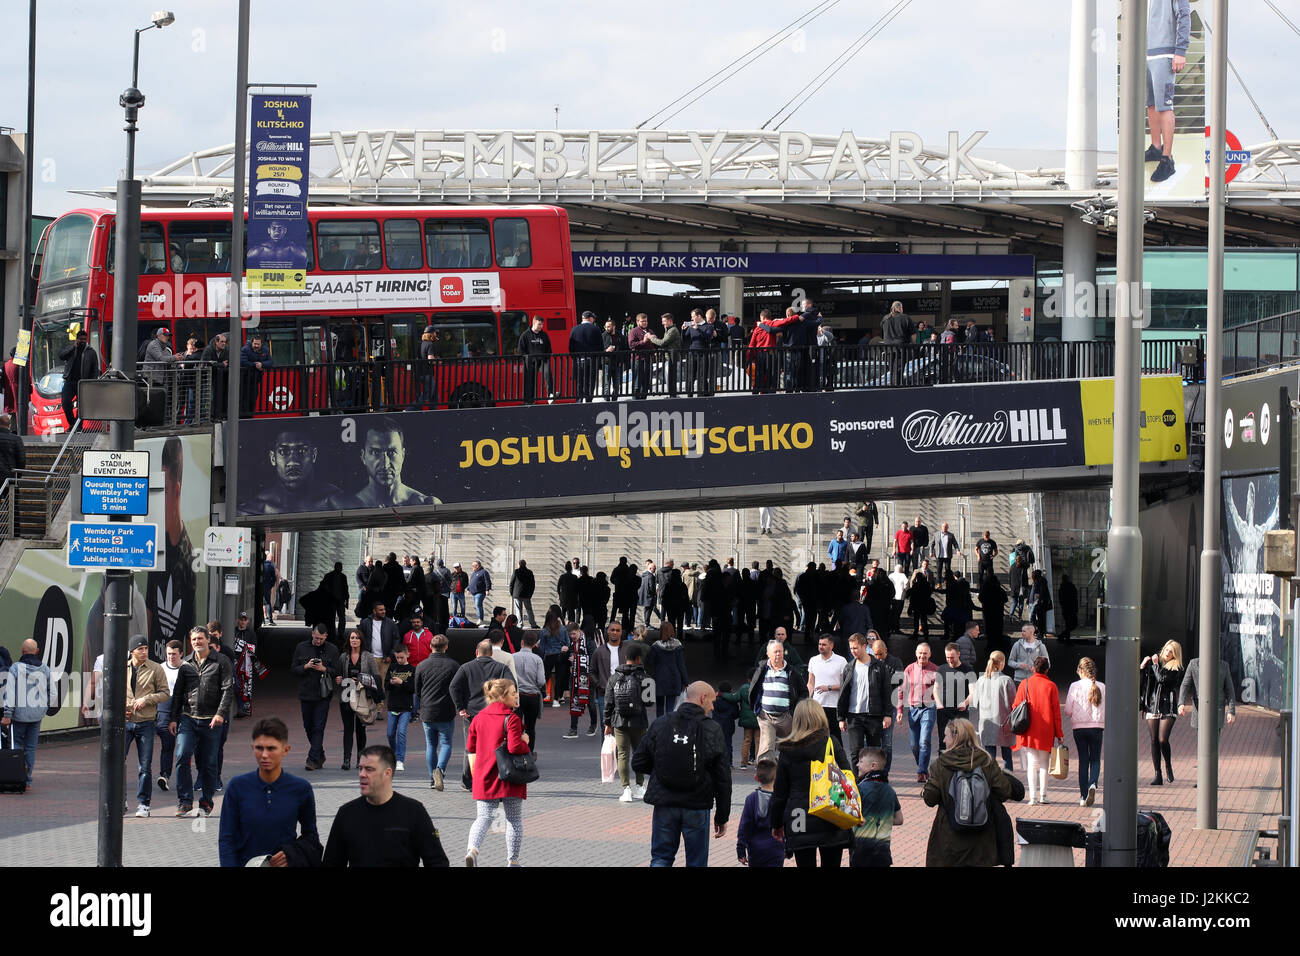 Fan's arrive early at Wembley Stadium, London. PRESS ASSOCIATION Photo. Picture date: Saturday April 29, 2017. See PA story BOXING London. Photo credit should read: Nick Potts/PA Wire Stock Photo